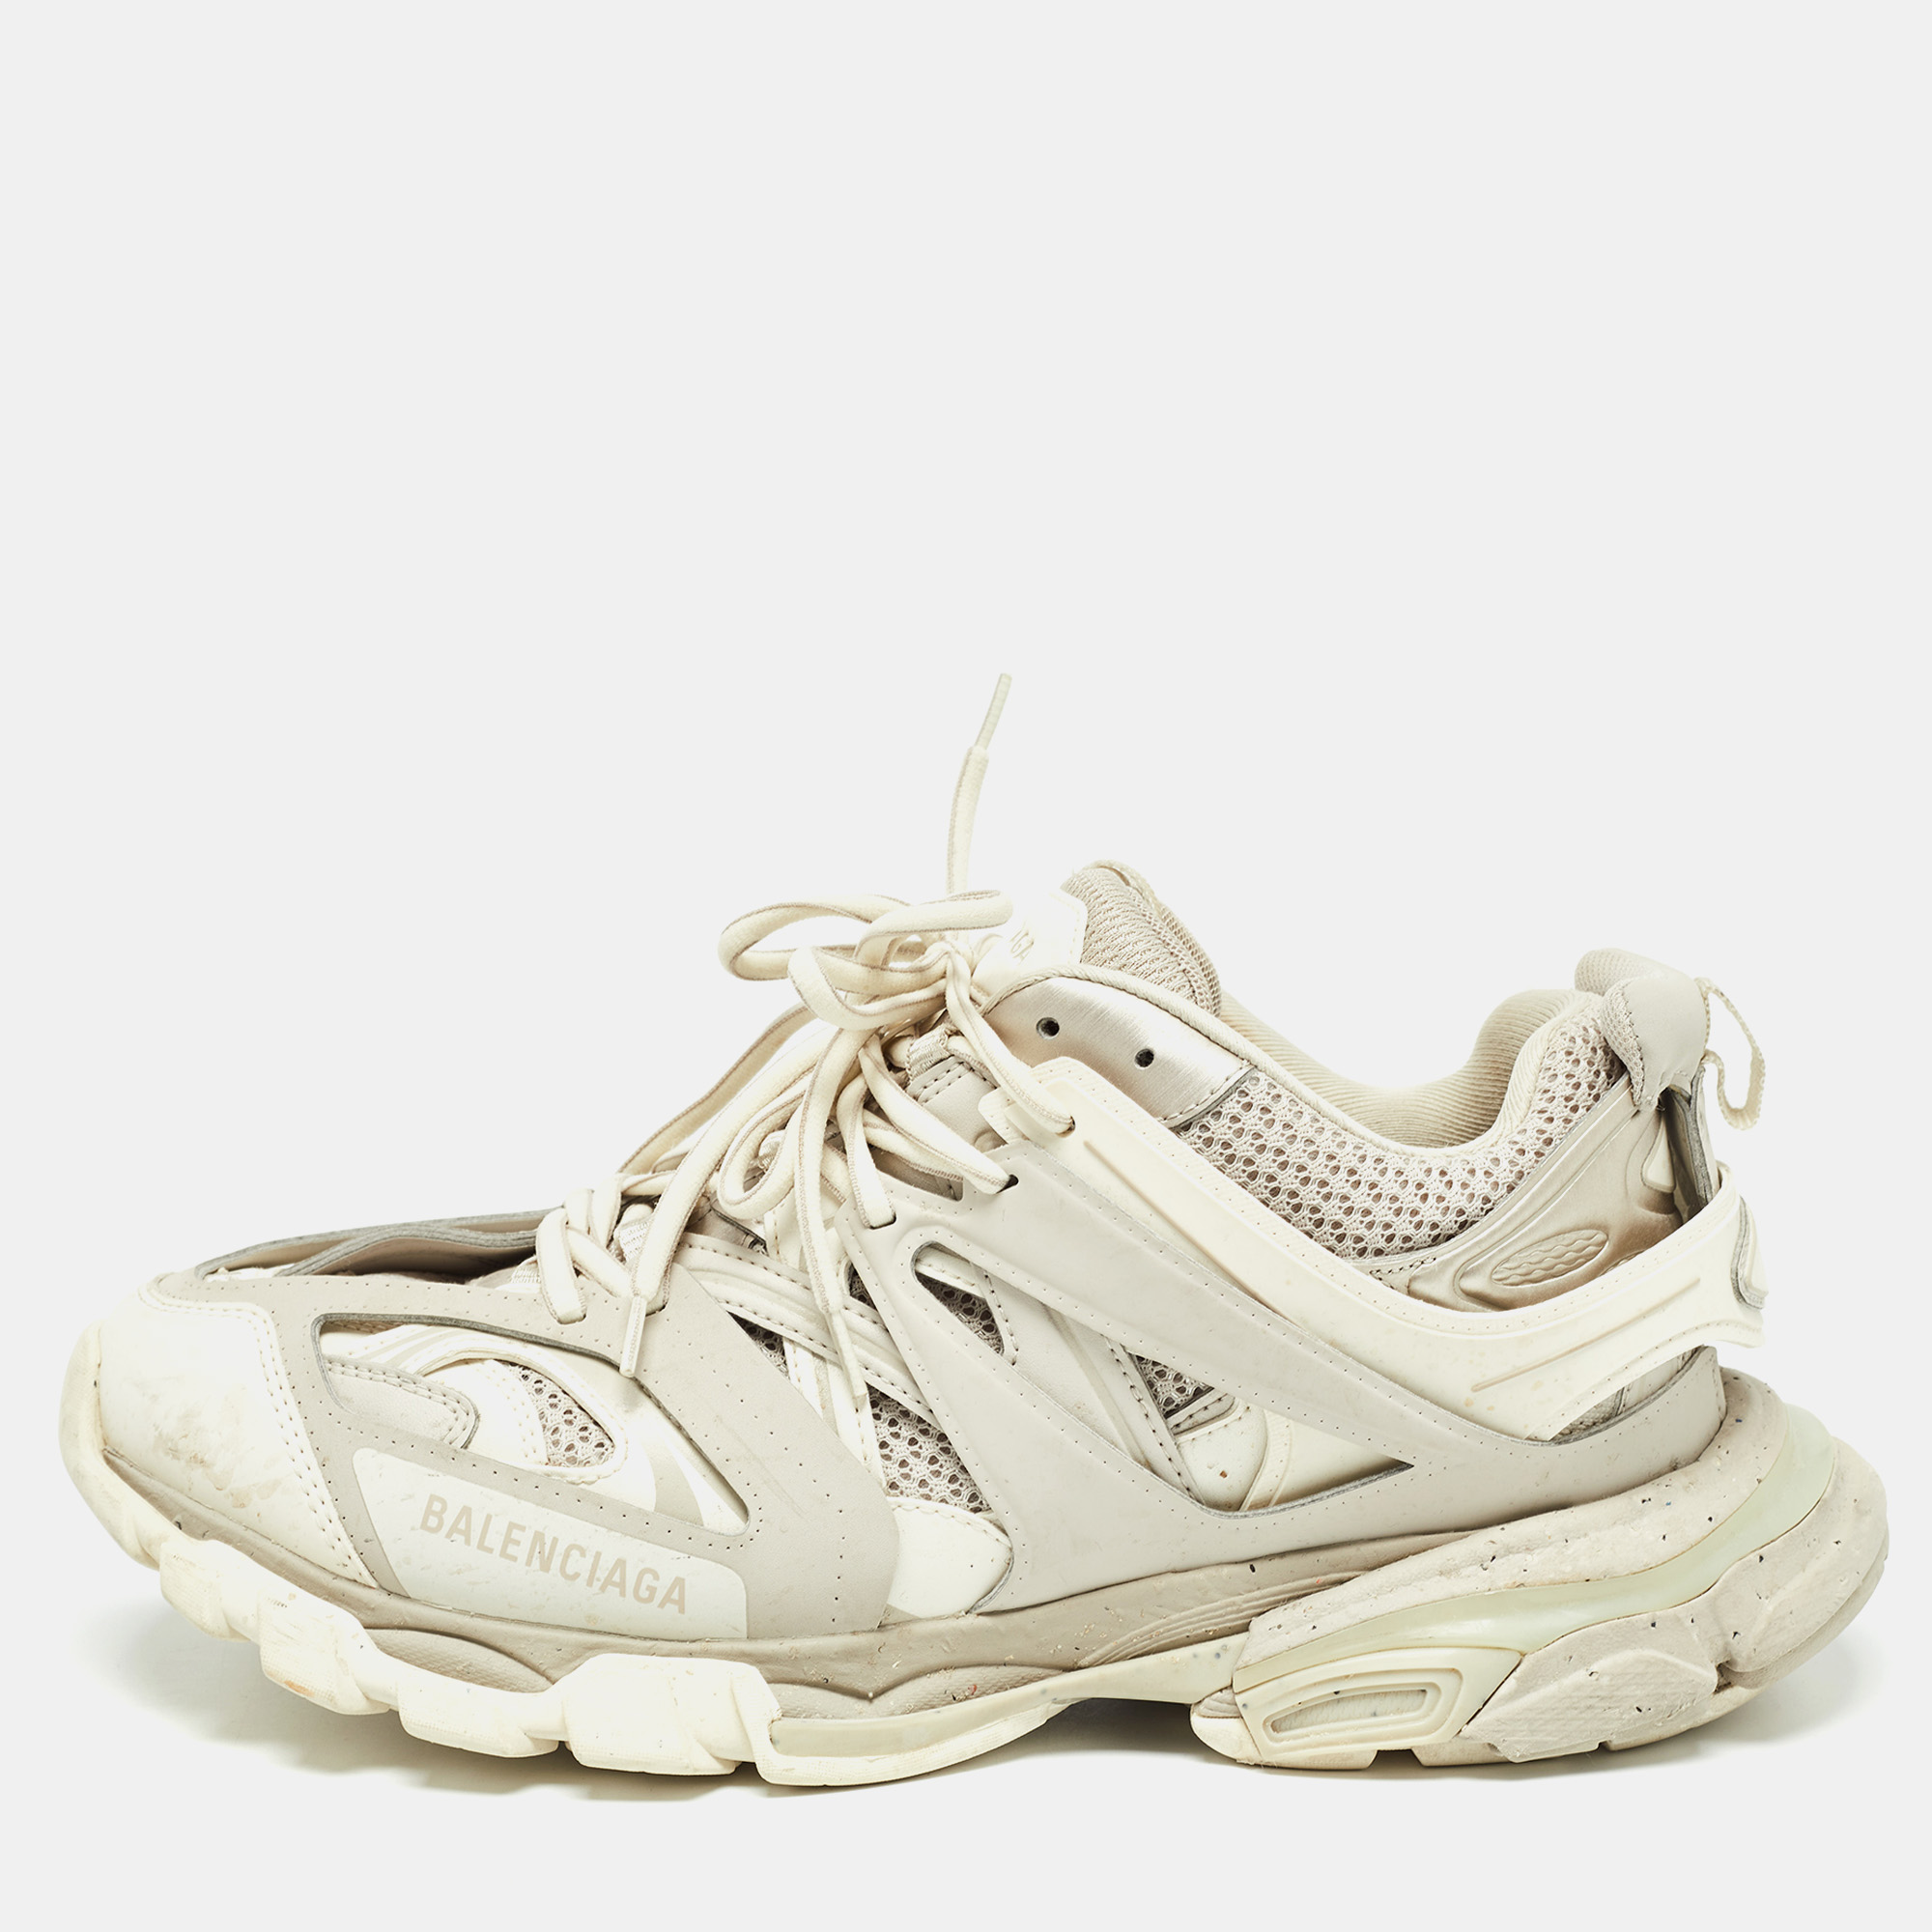 

Balenciaga Grey/Cream Faux Leather and Mesh Track Sneakers Size